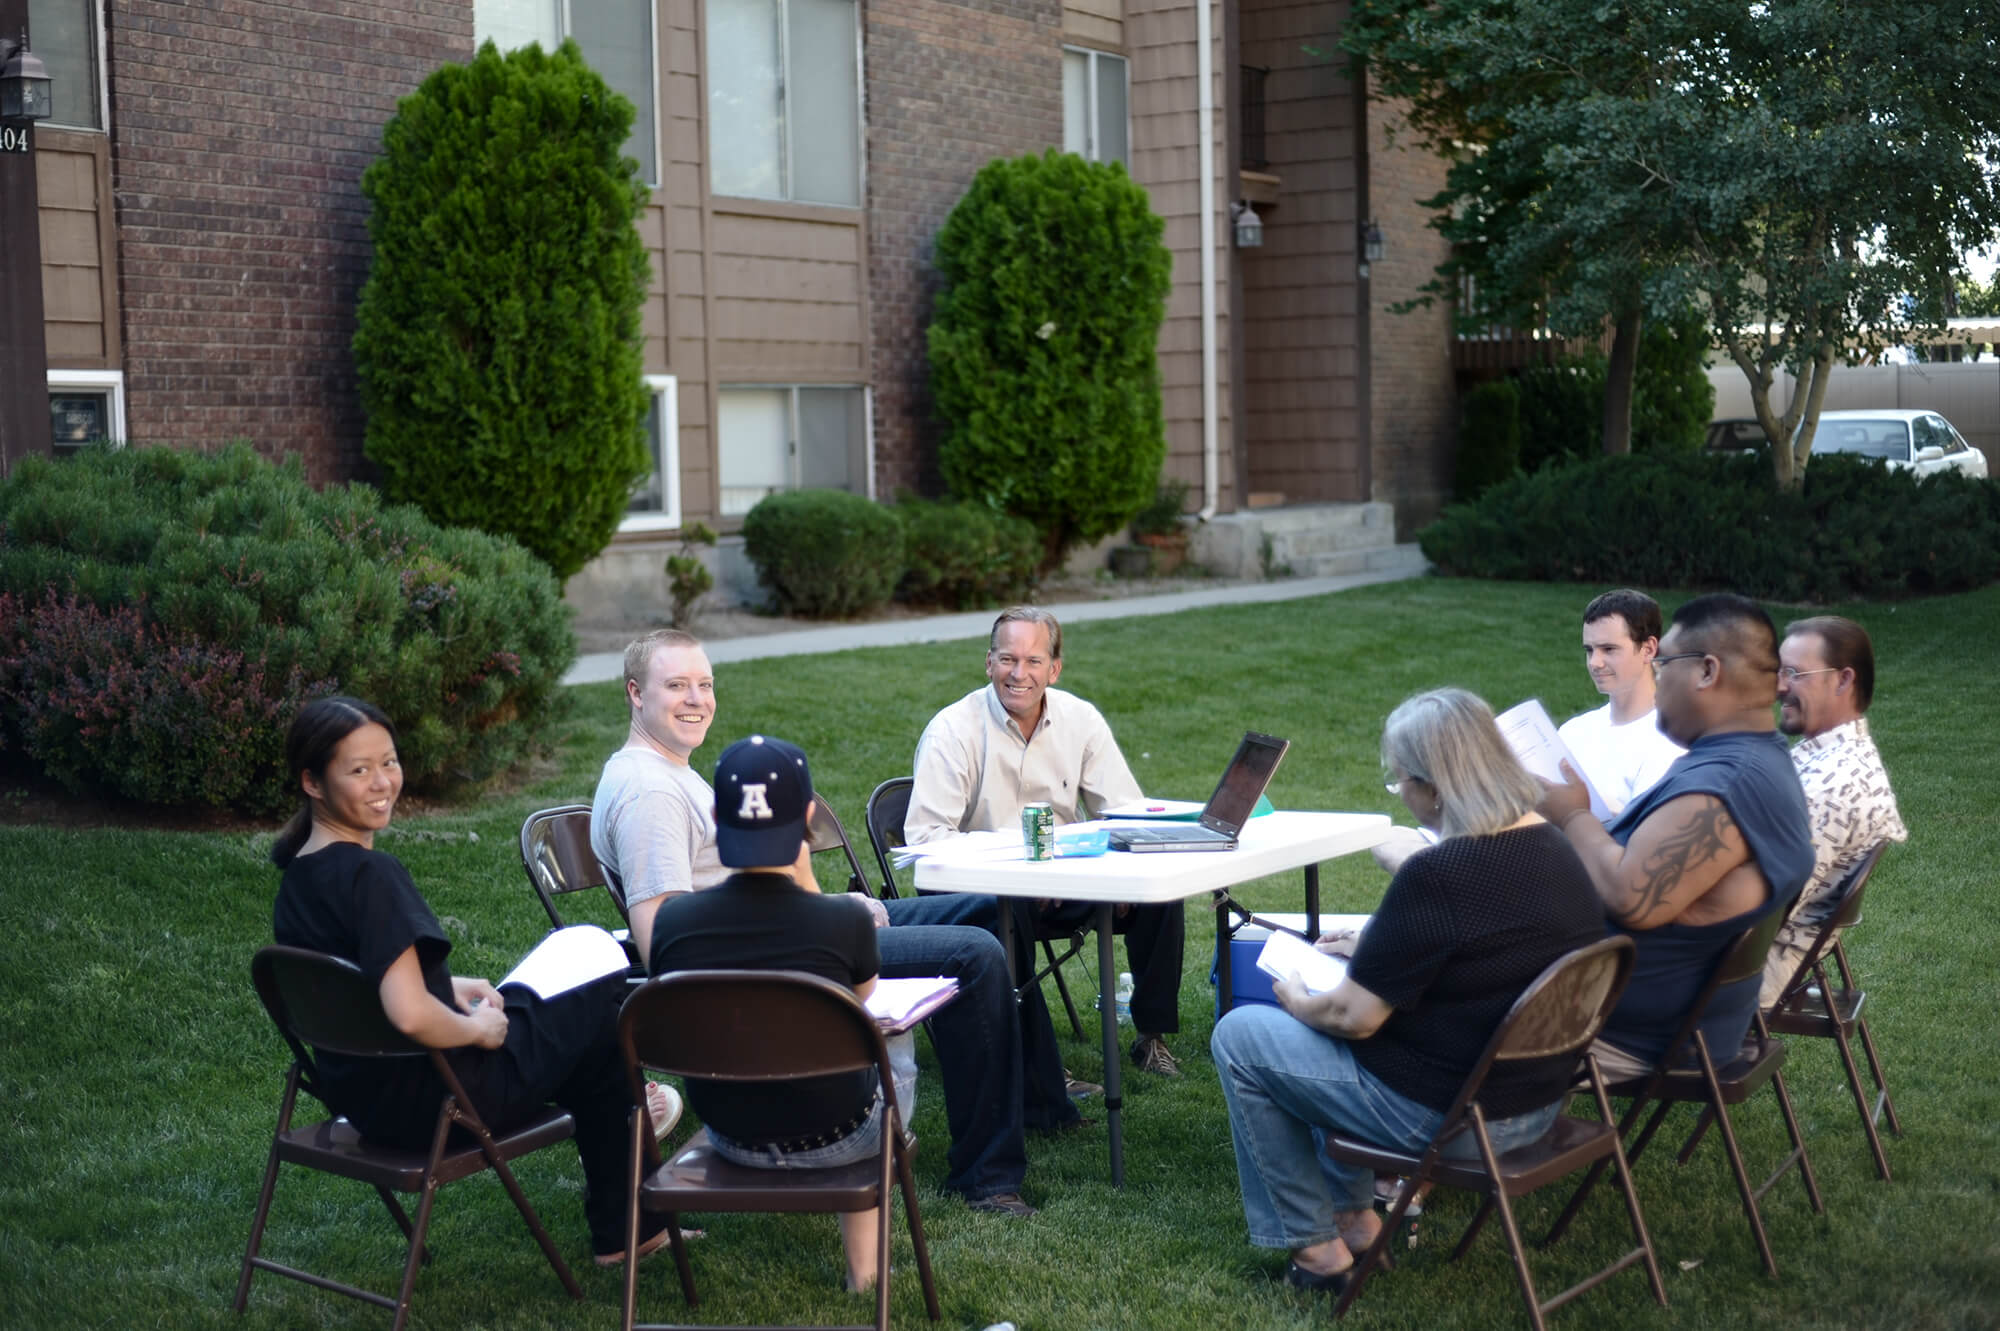 Home owners conducting a meeting